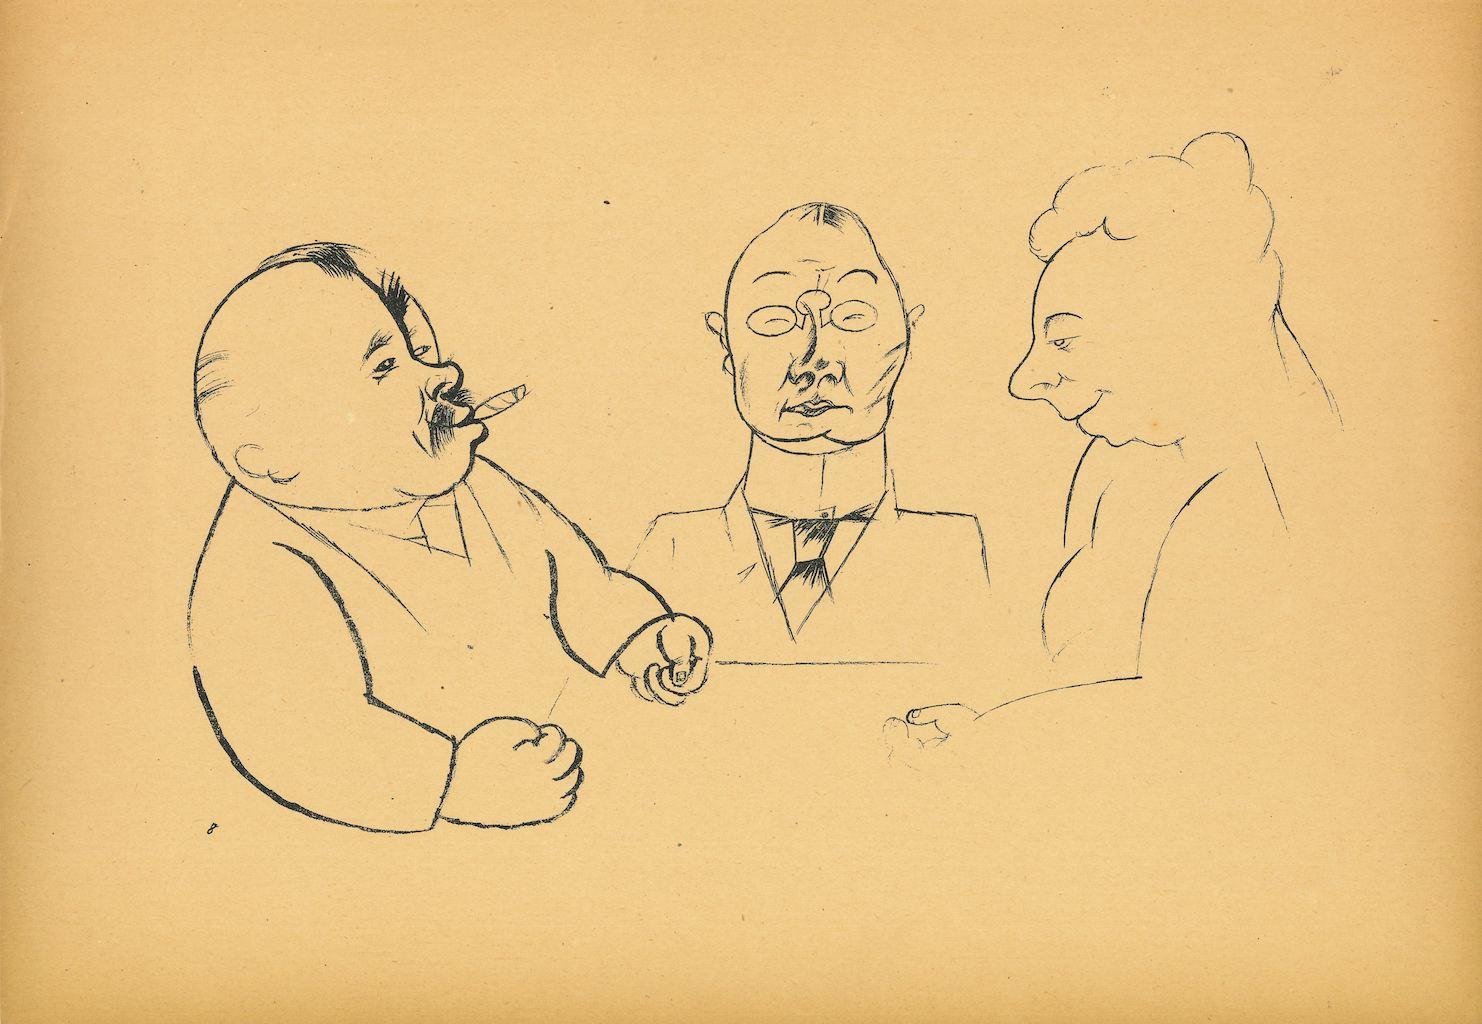 Better People - Original Offset and Lithograph by George Grosz - 1923